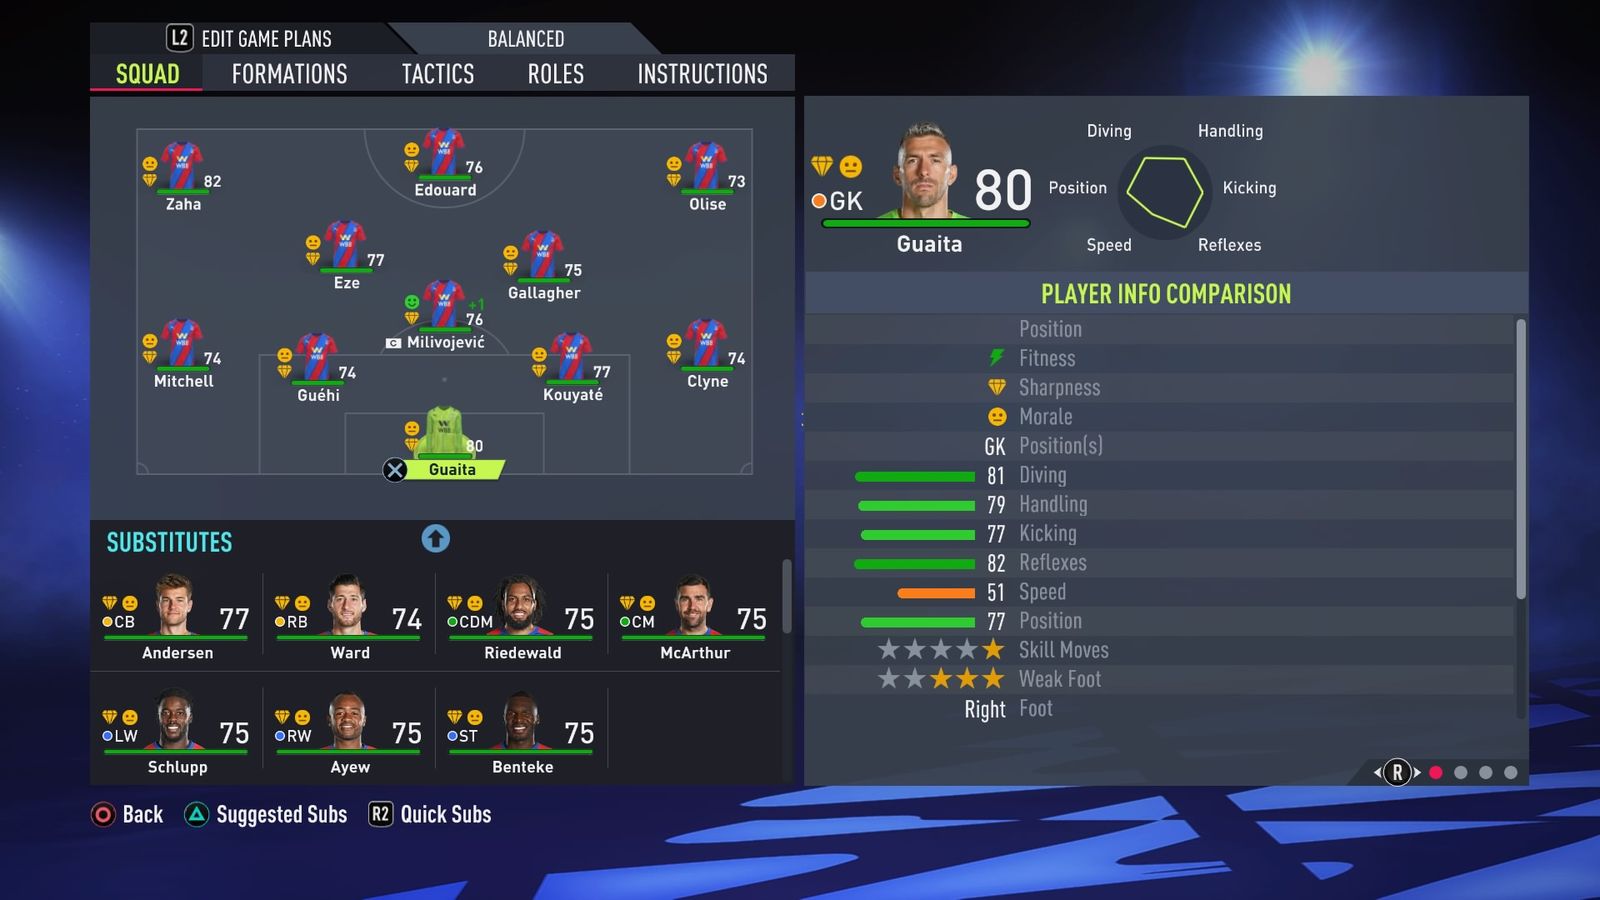 FIFA 22 Crystal Palace starting line up